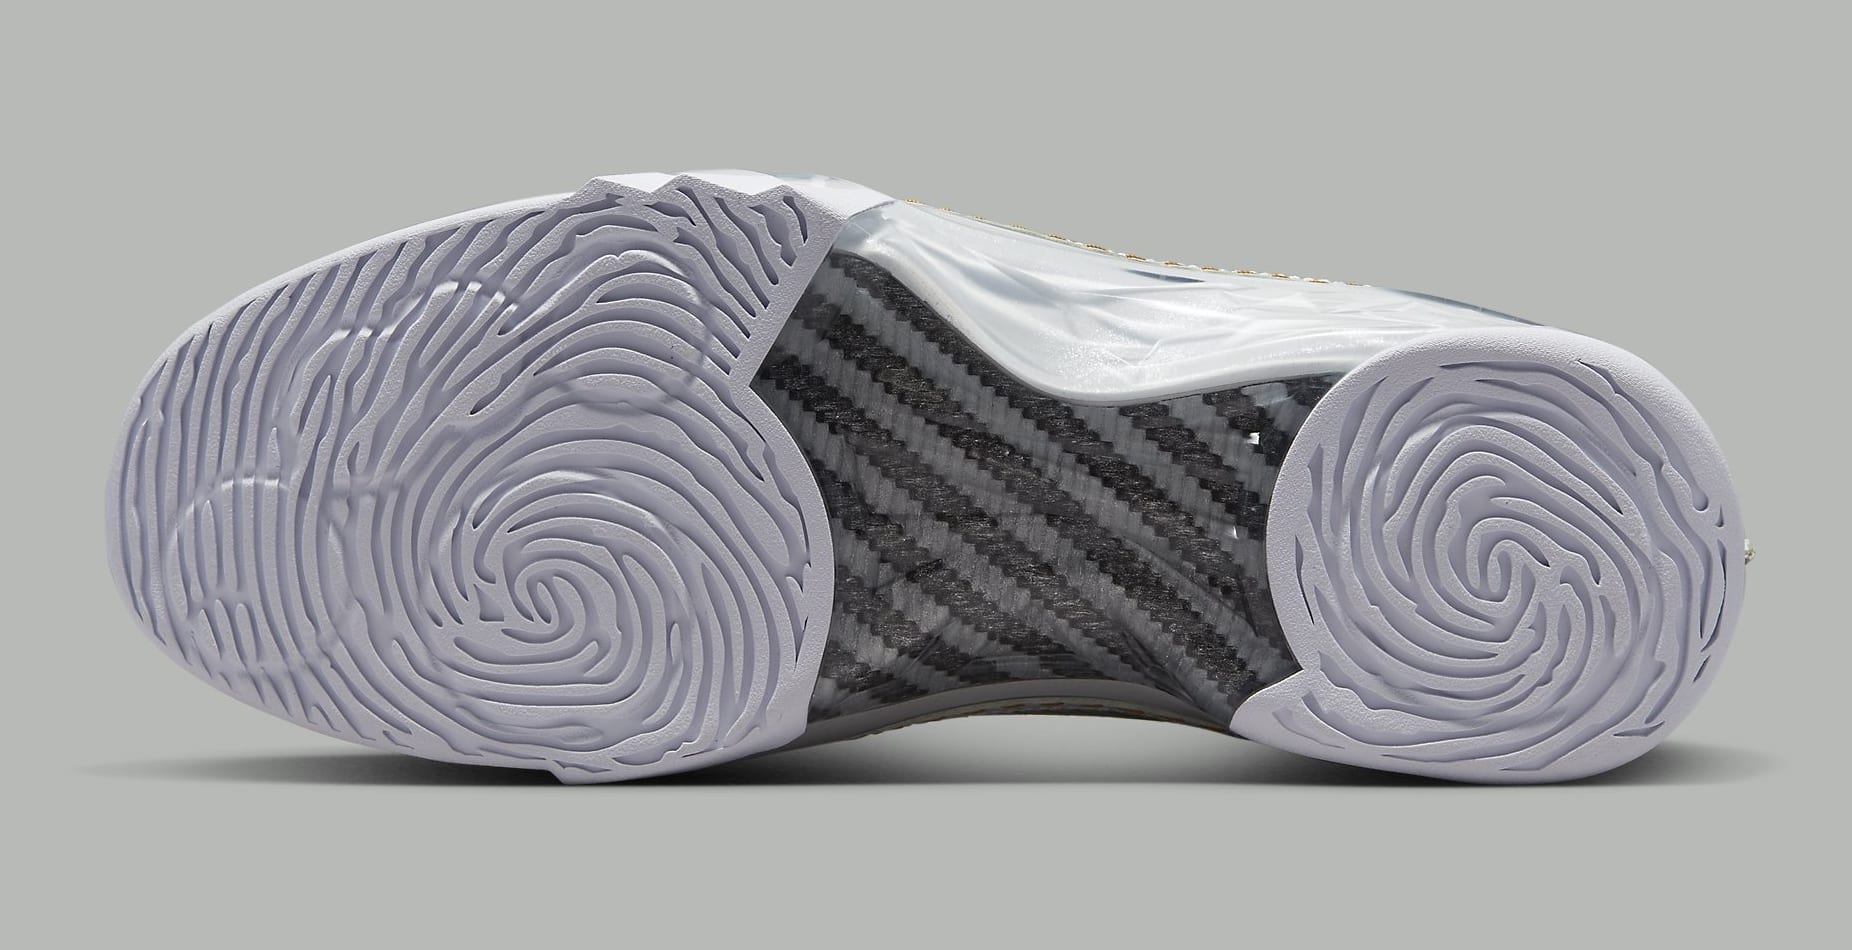 Air Jordan 23 'Year of the Rabbit' 2023 FB8947 001 Outsole